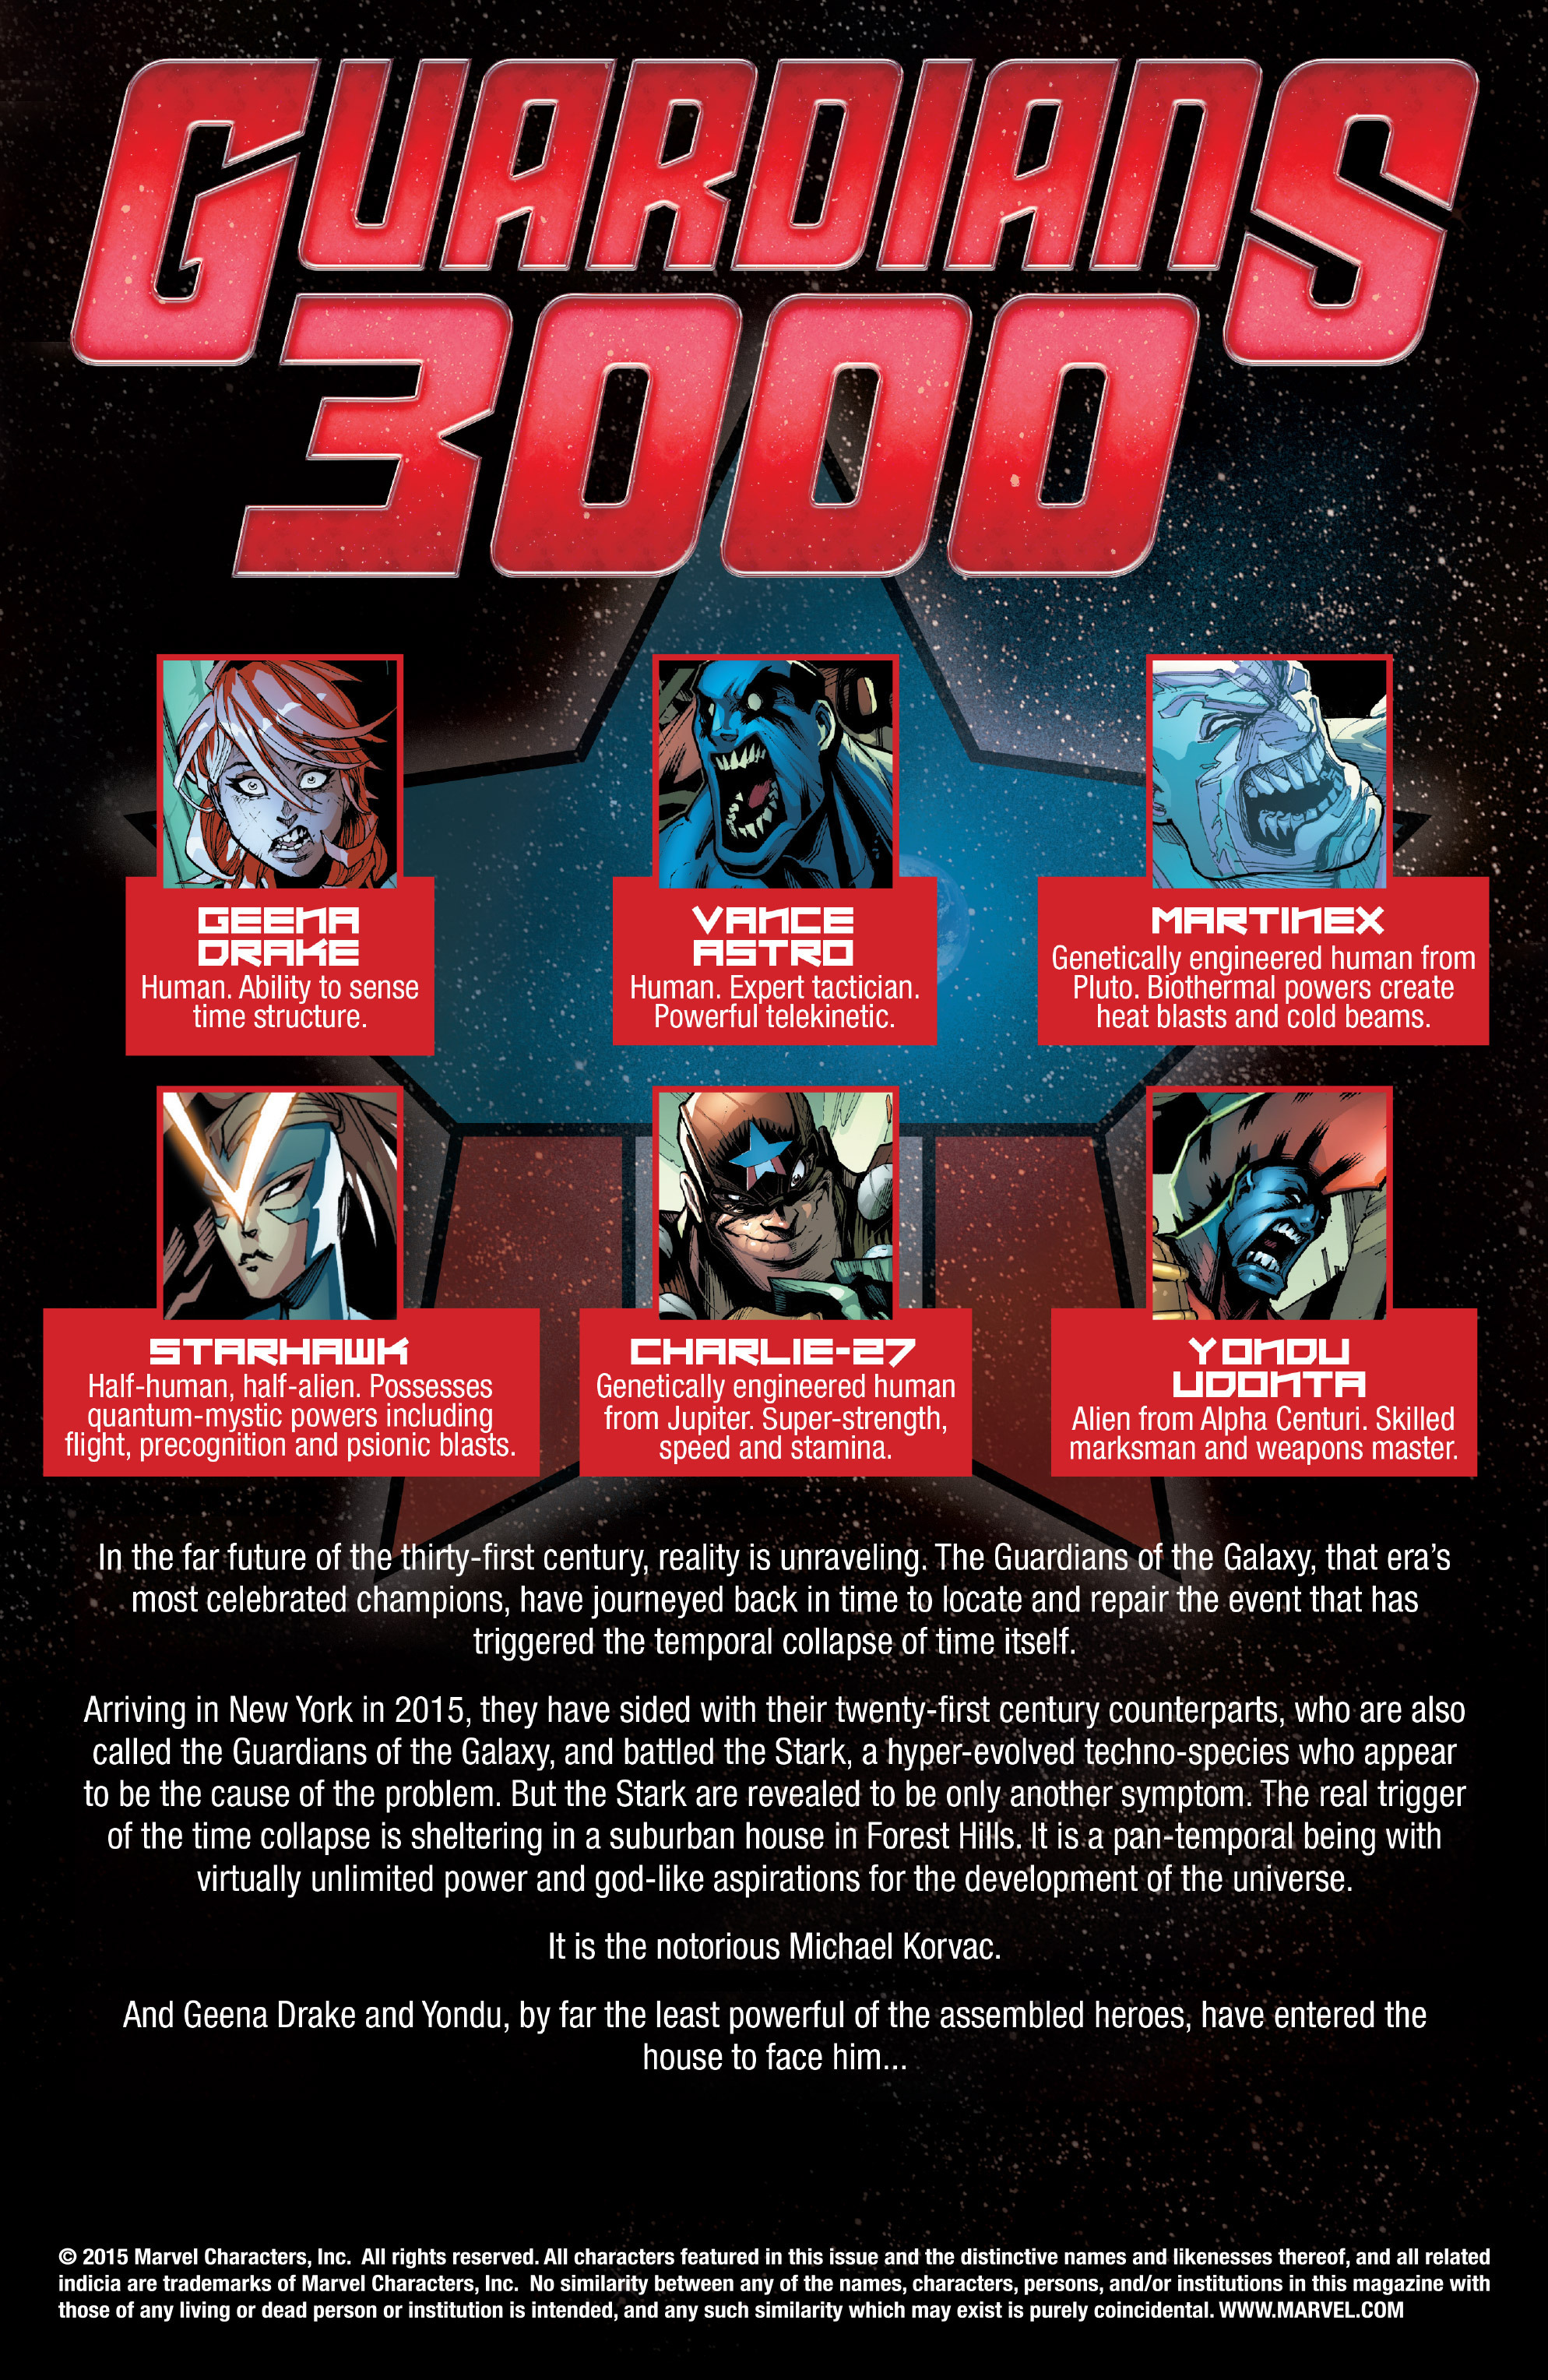 Read online Guardians 3000 comic -  Issue #8 - 2